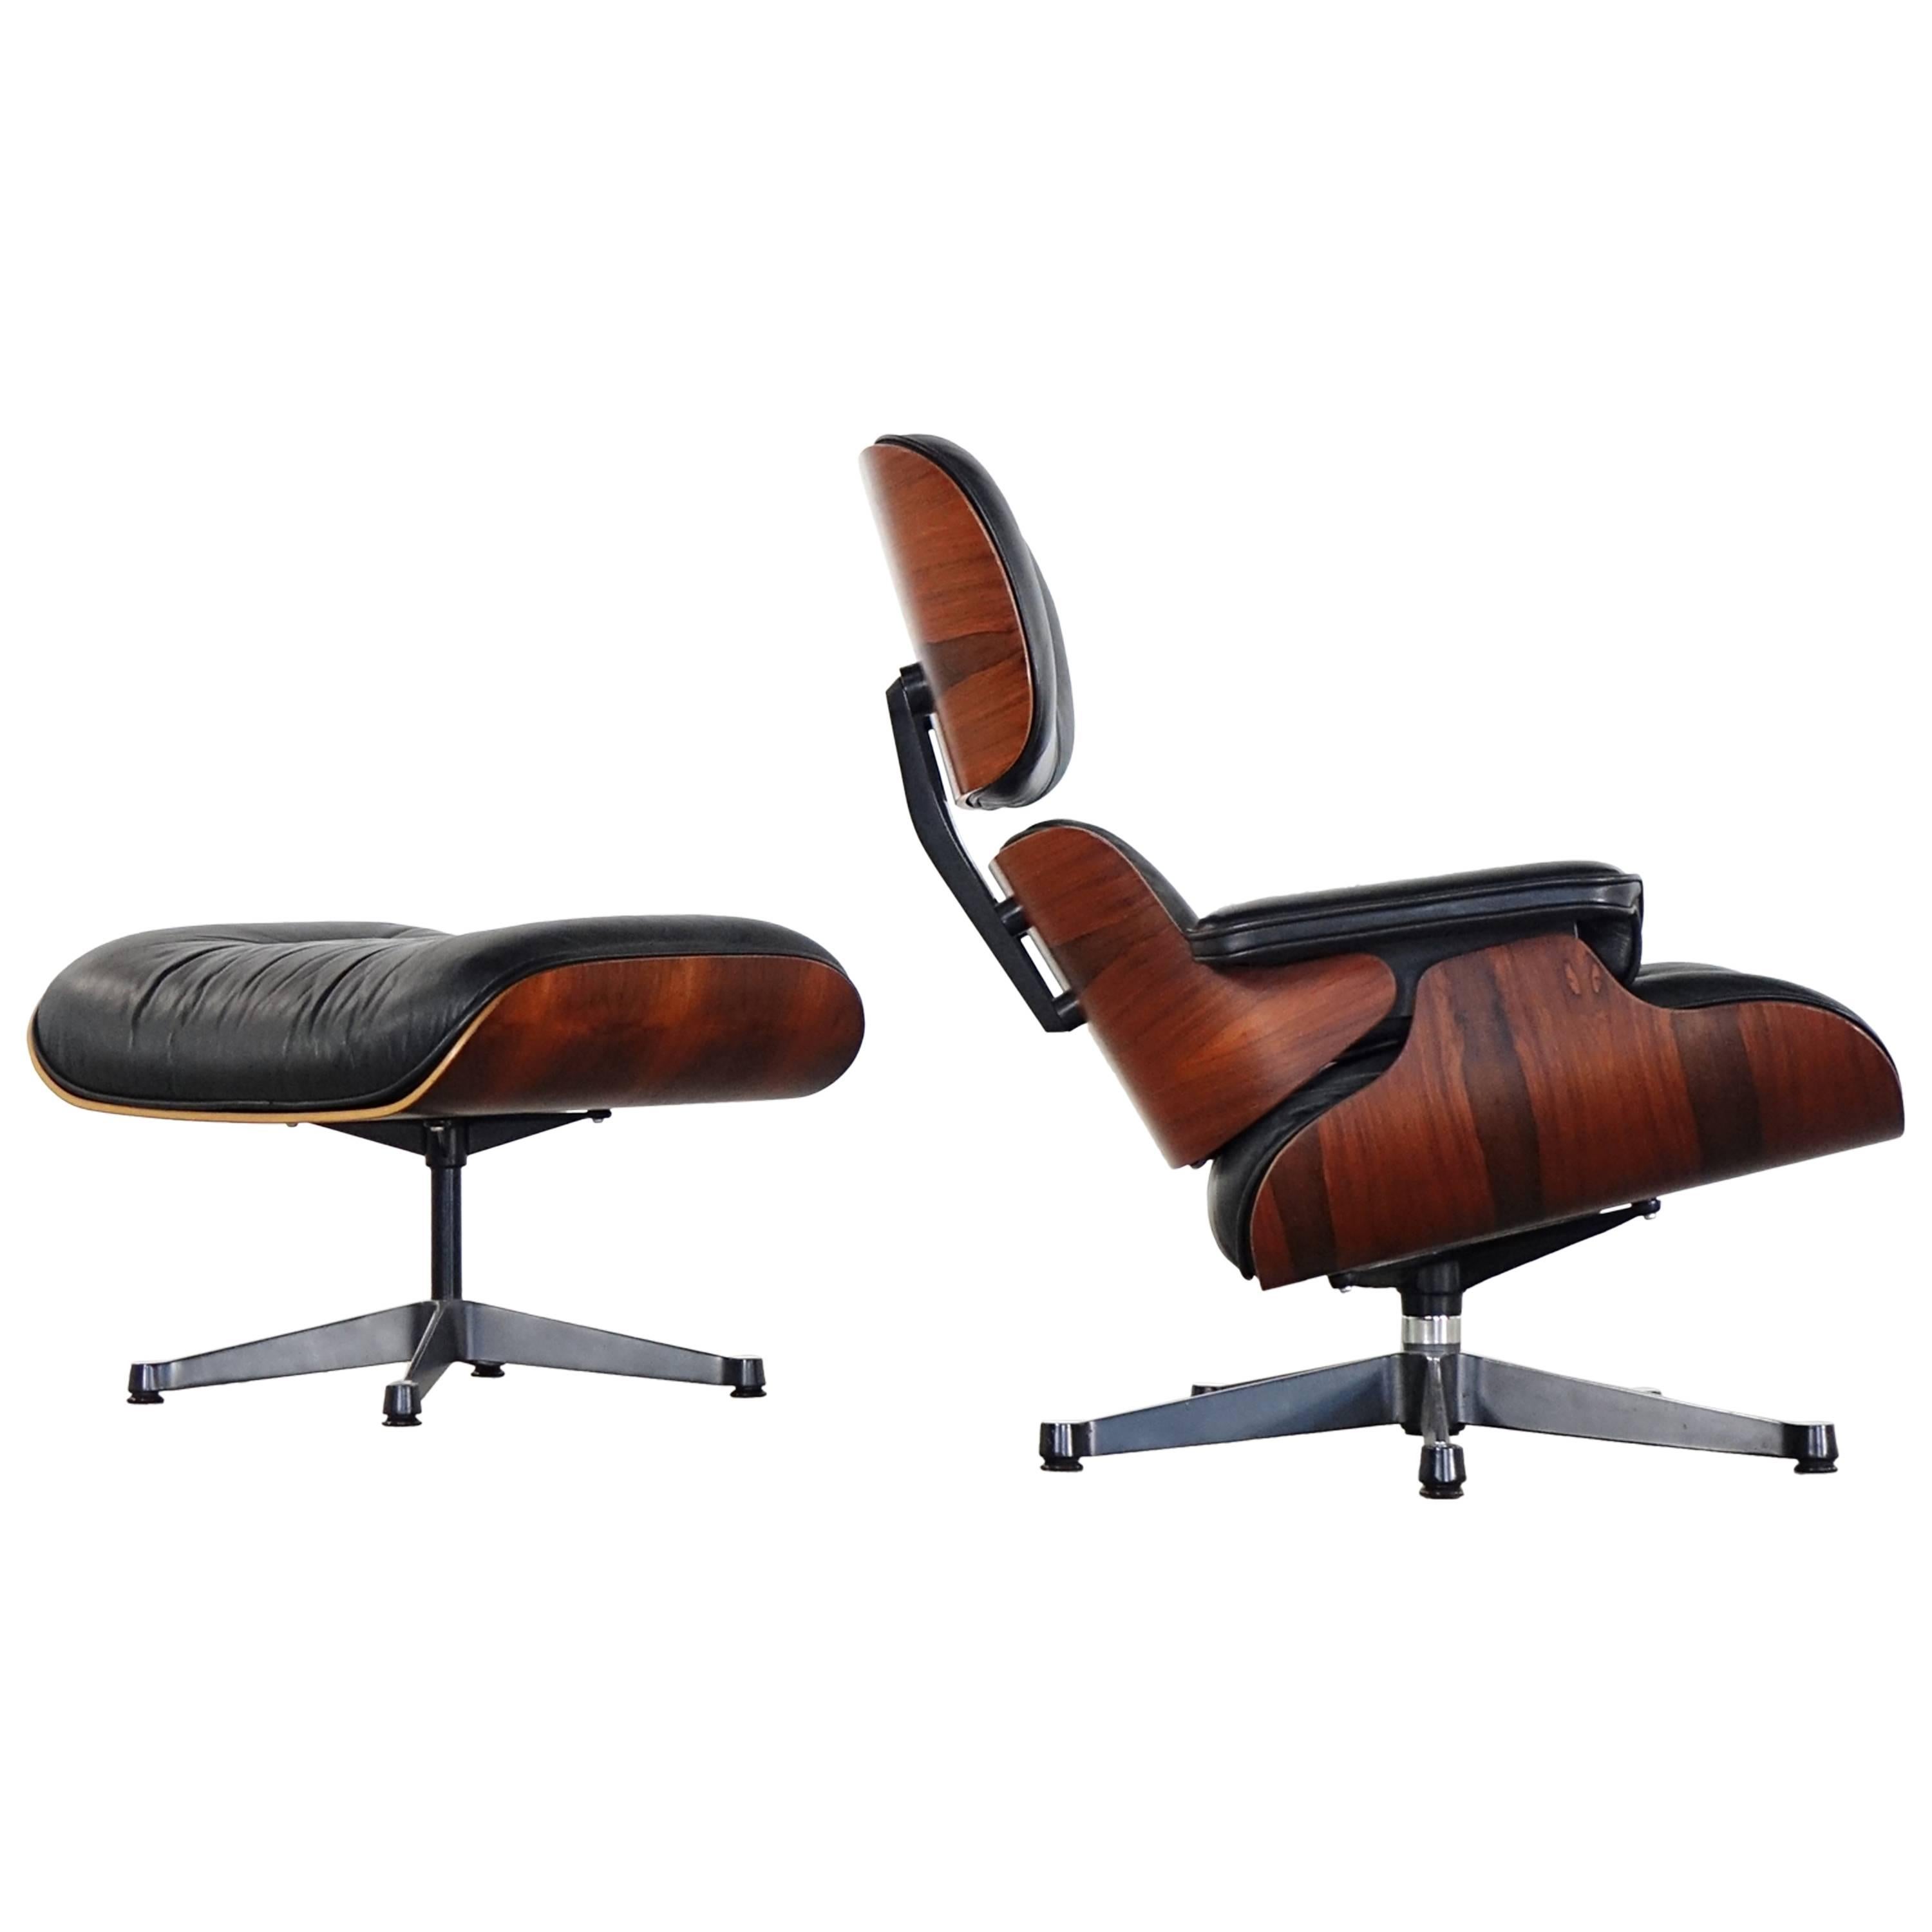 Vitra Charles Eames Lounge Chair and Ottoman in Rio Rosewood Herman Miller